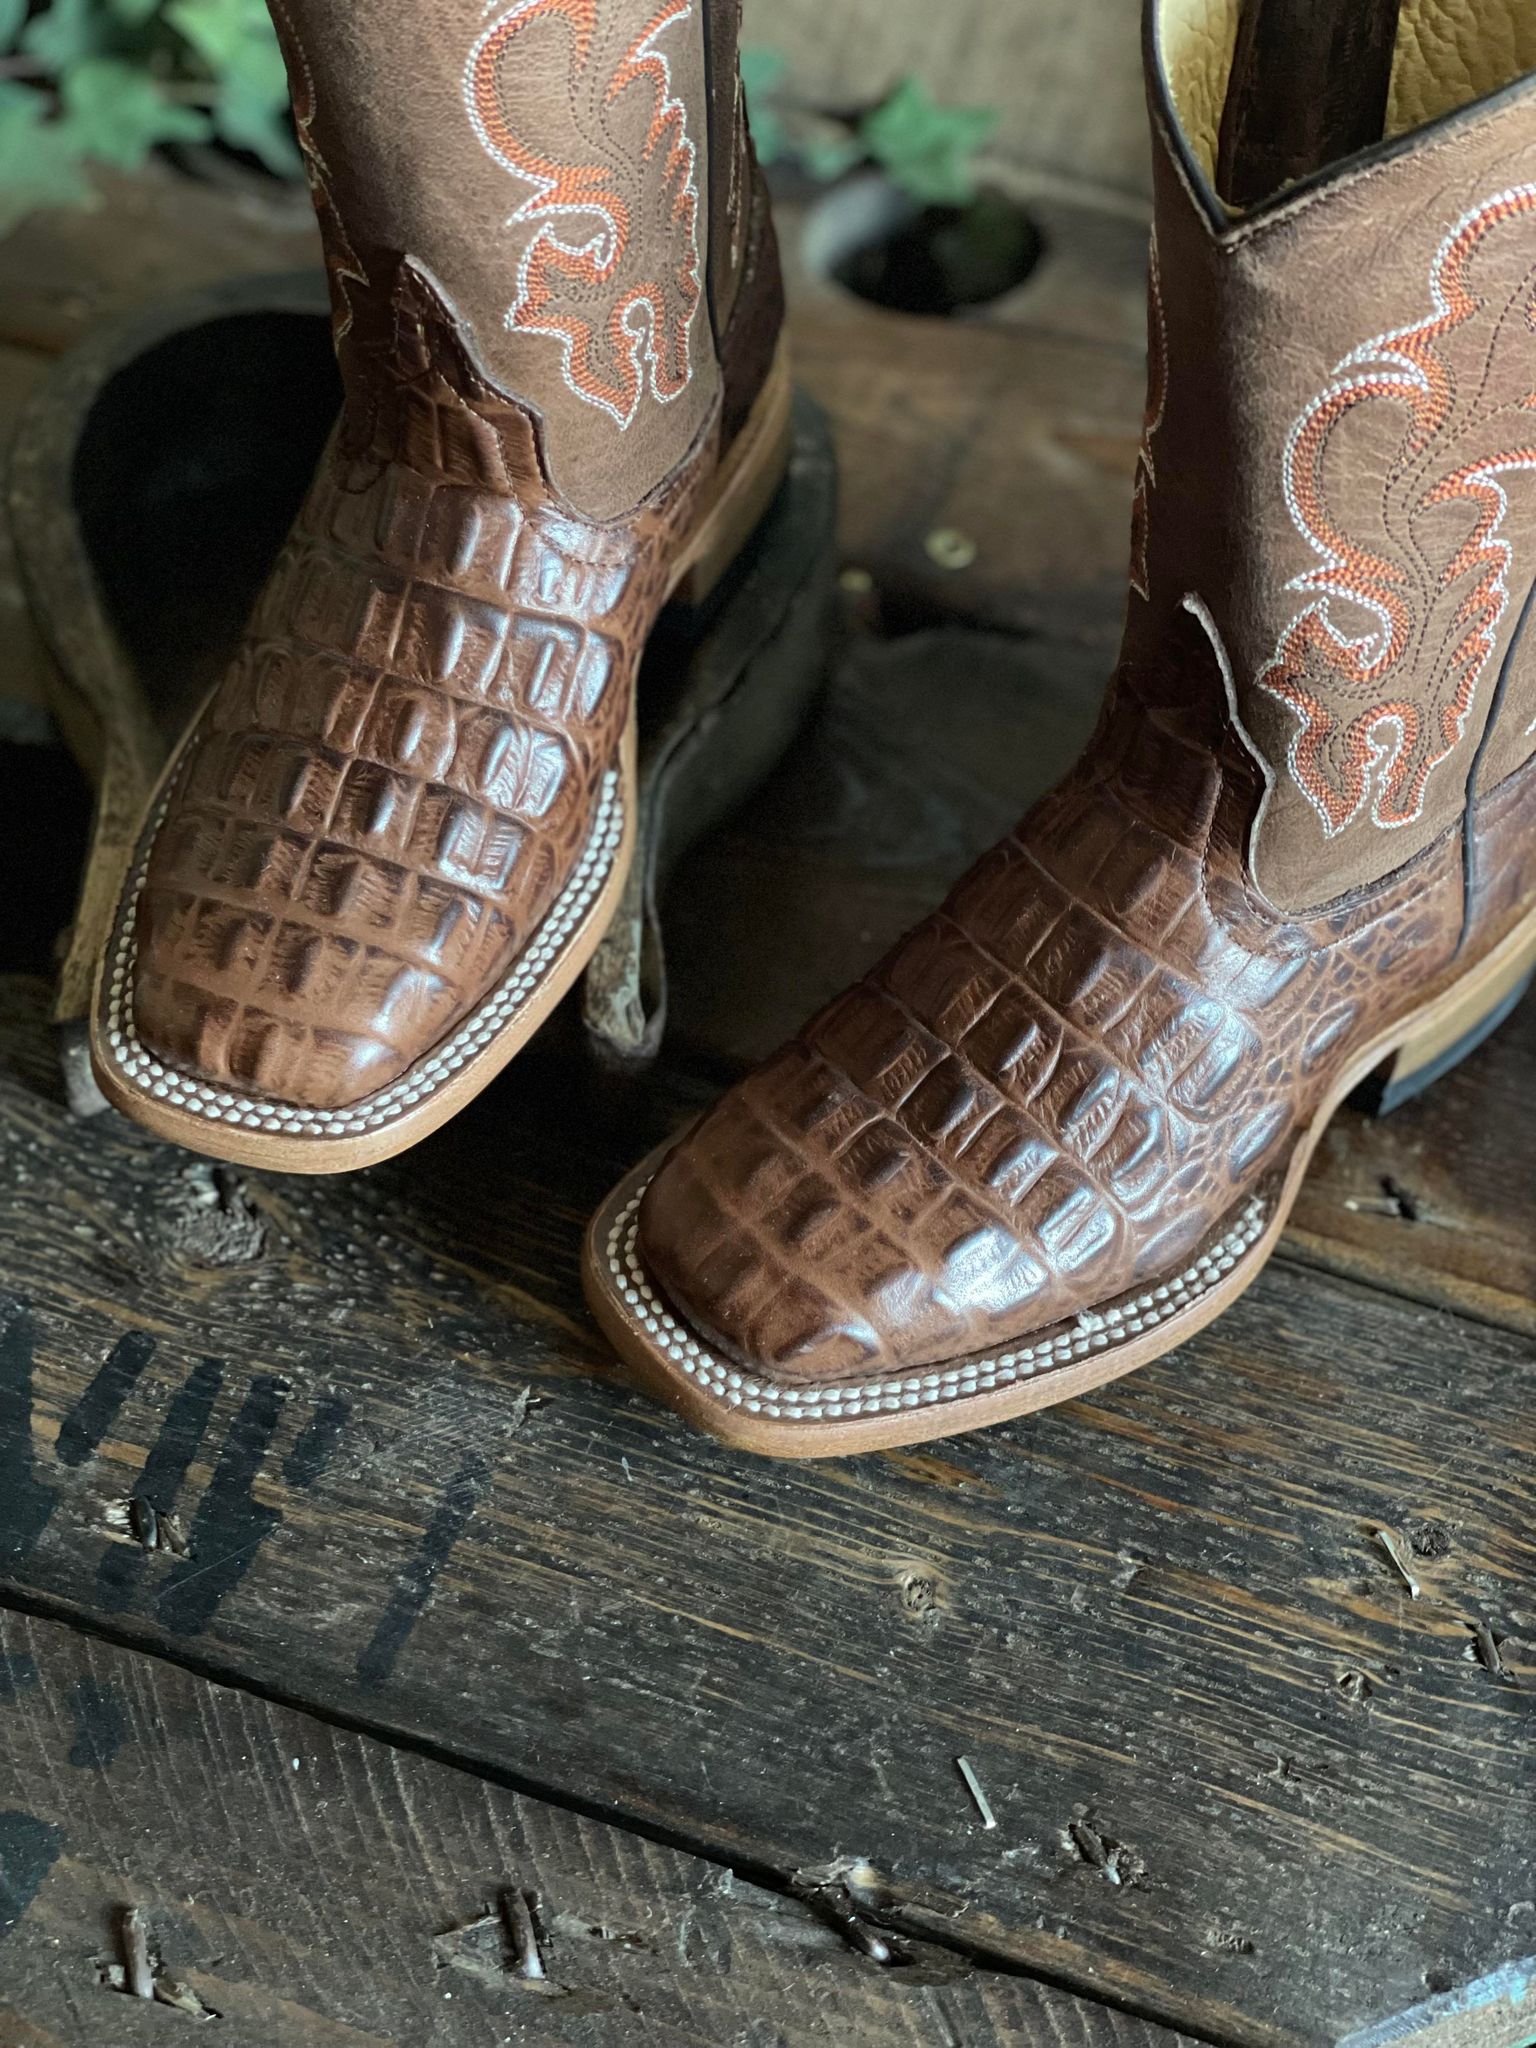 Kids AB Chocolate Nile Croc Print Boots-Kids Boots-Anderson Bean-Lucky J Boots & More, Women's, Men's, & Kids Western Store Located in Carthage, MO